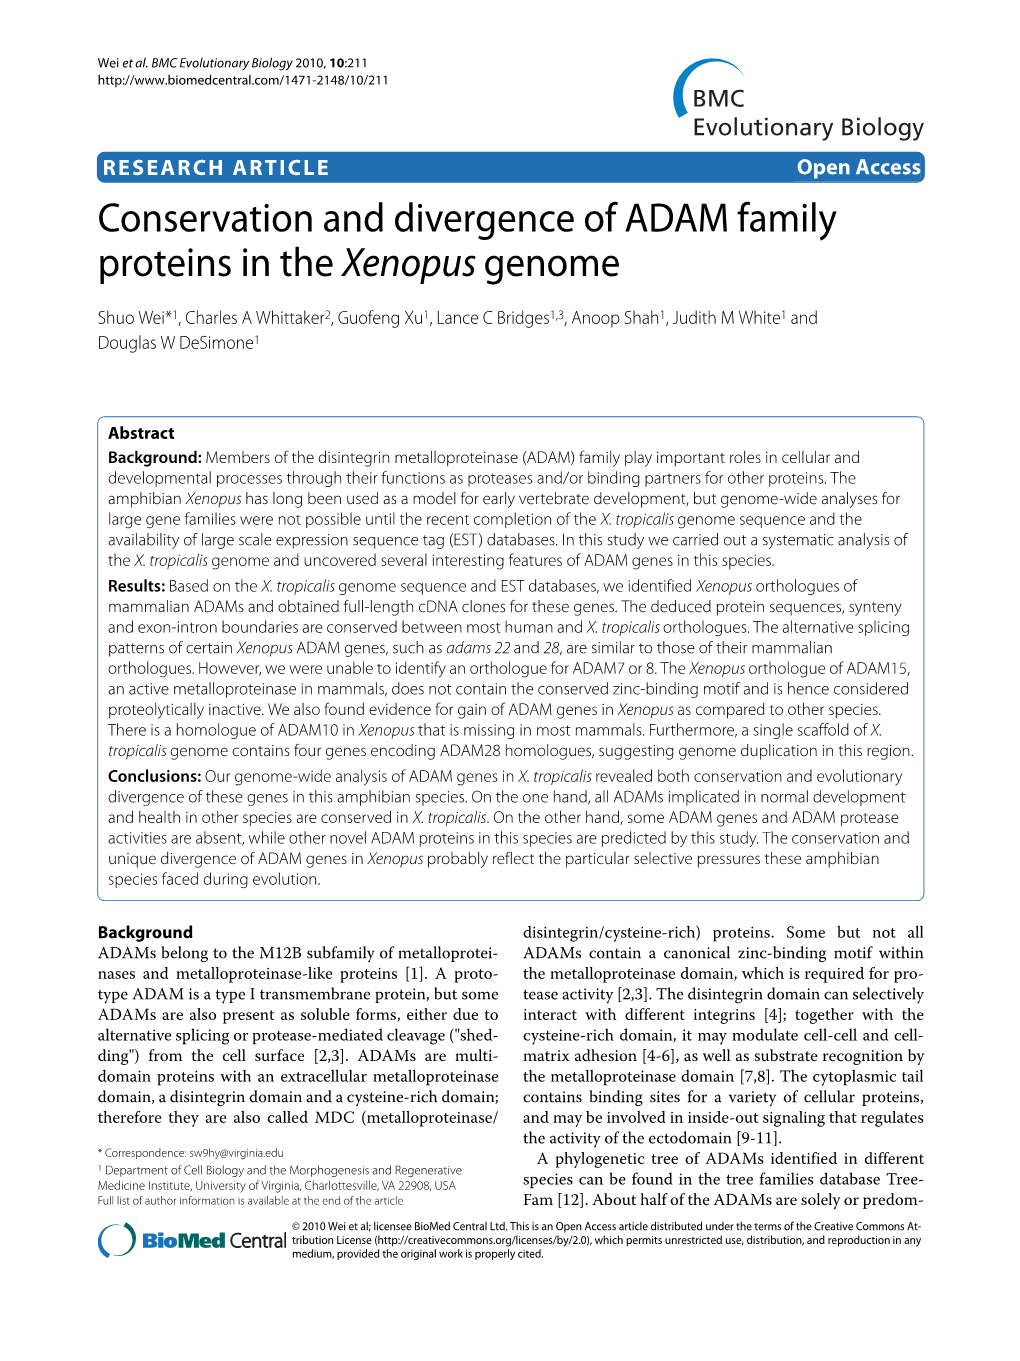 Conservation and Divergence of ADAM Family Proteins in the Xenopus Genome